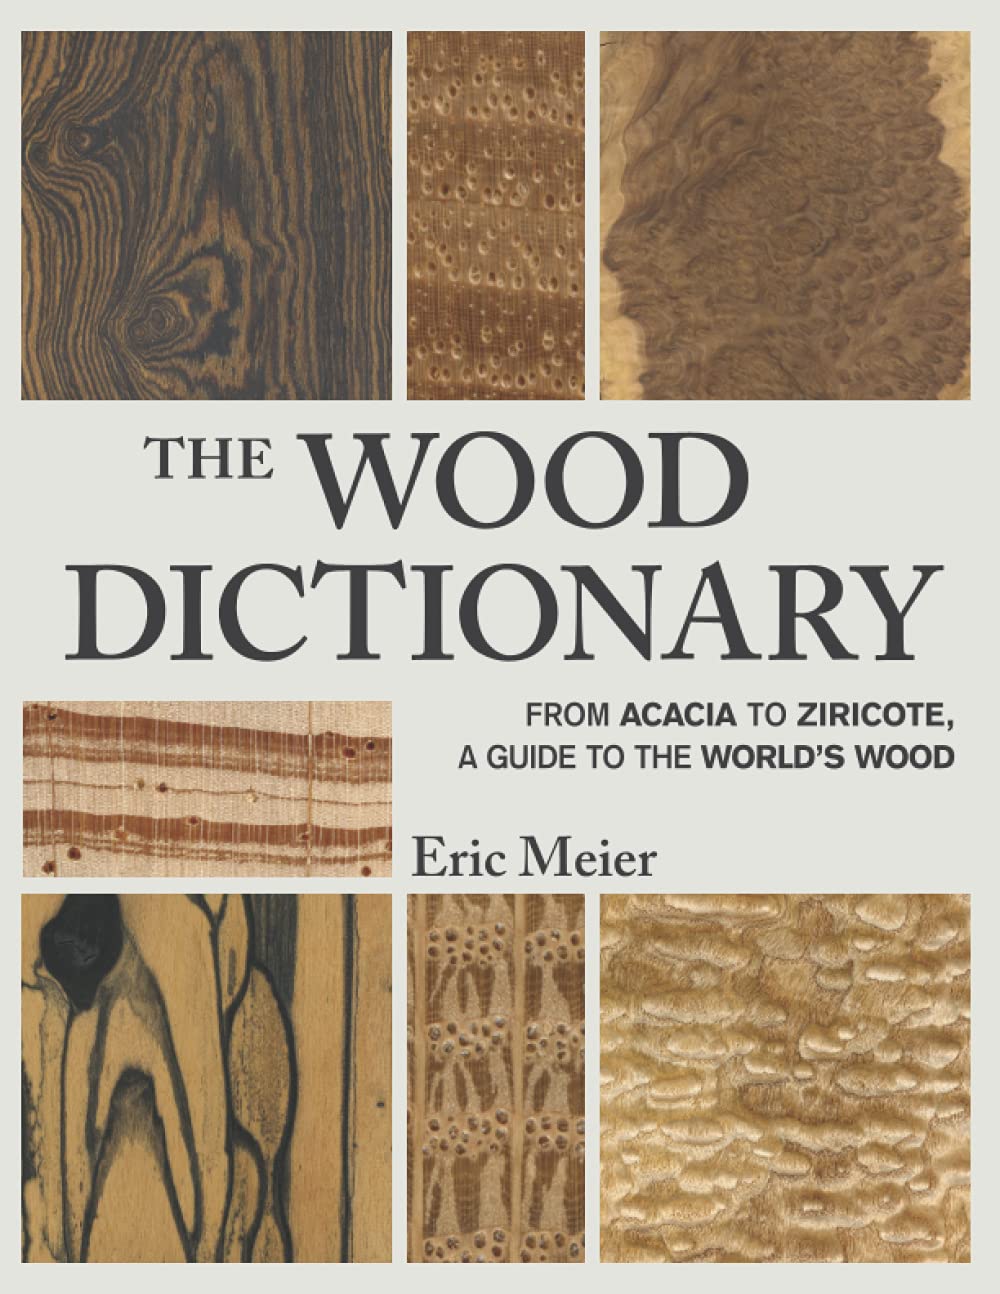 The Wood Dictionary: From Acacia to Ziricote, a Guide to the World's Wood